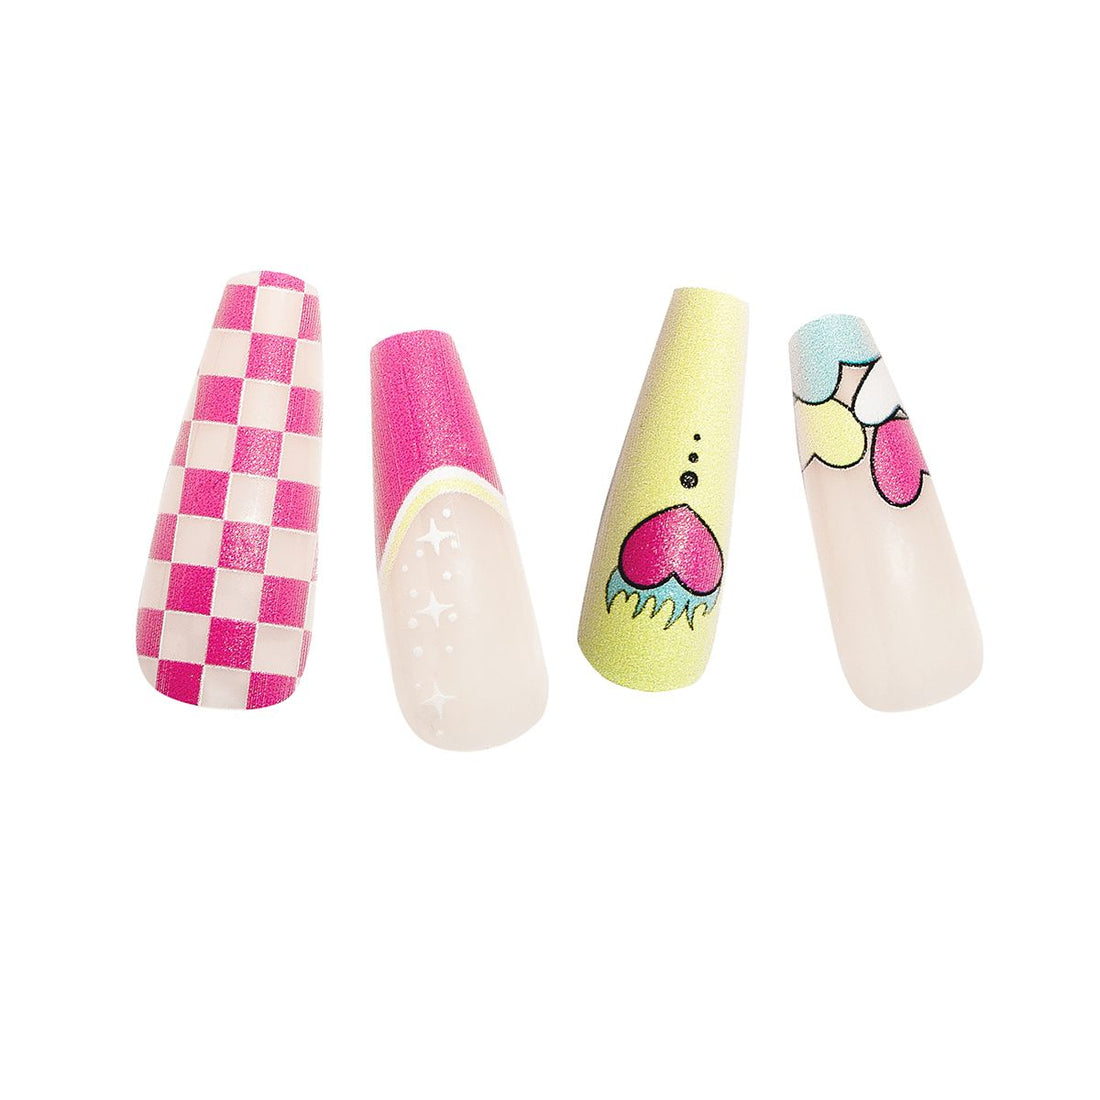 Pink Press On Nails with Glue - Coffin Shaped Nails with hearts